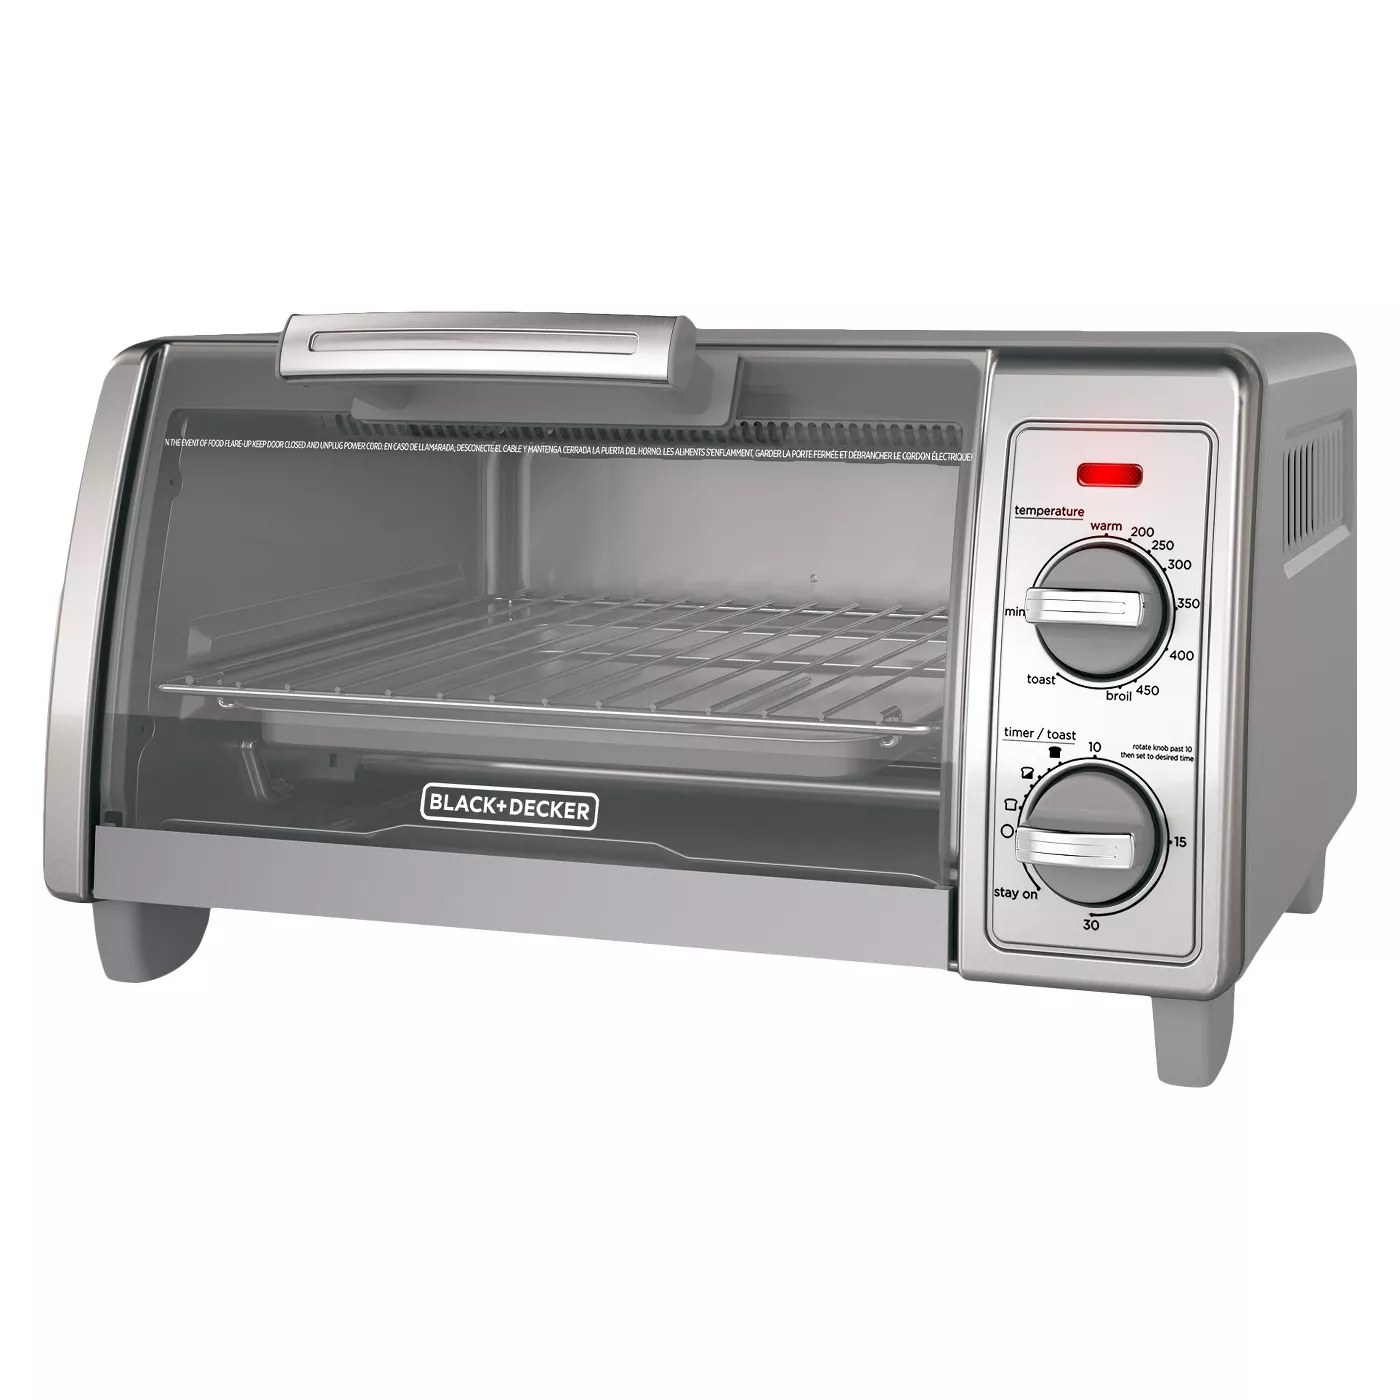 The Black+Decker toaster oven